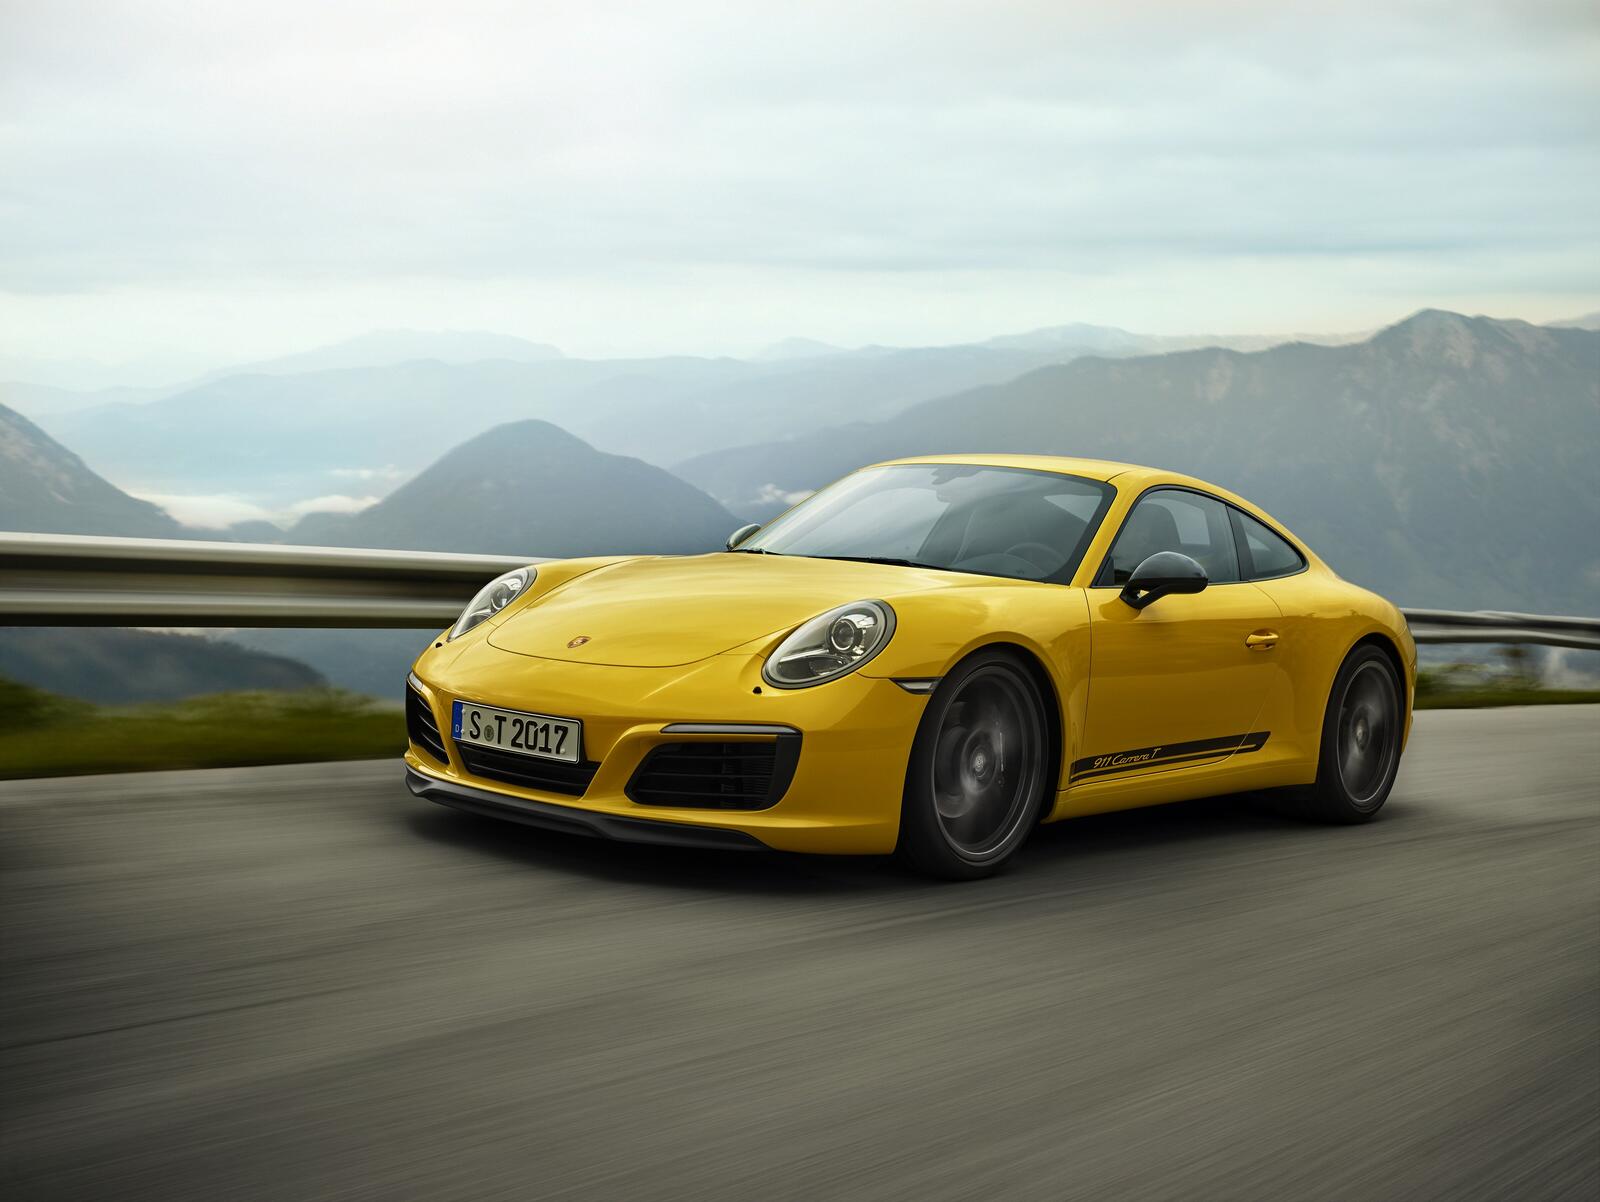 Free photo Porsche 911 carrera t yellow driving on a country road